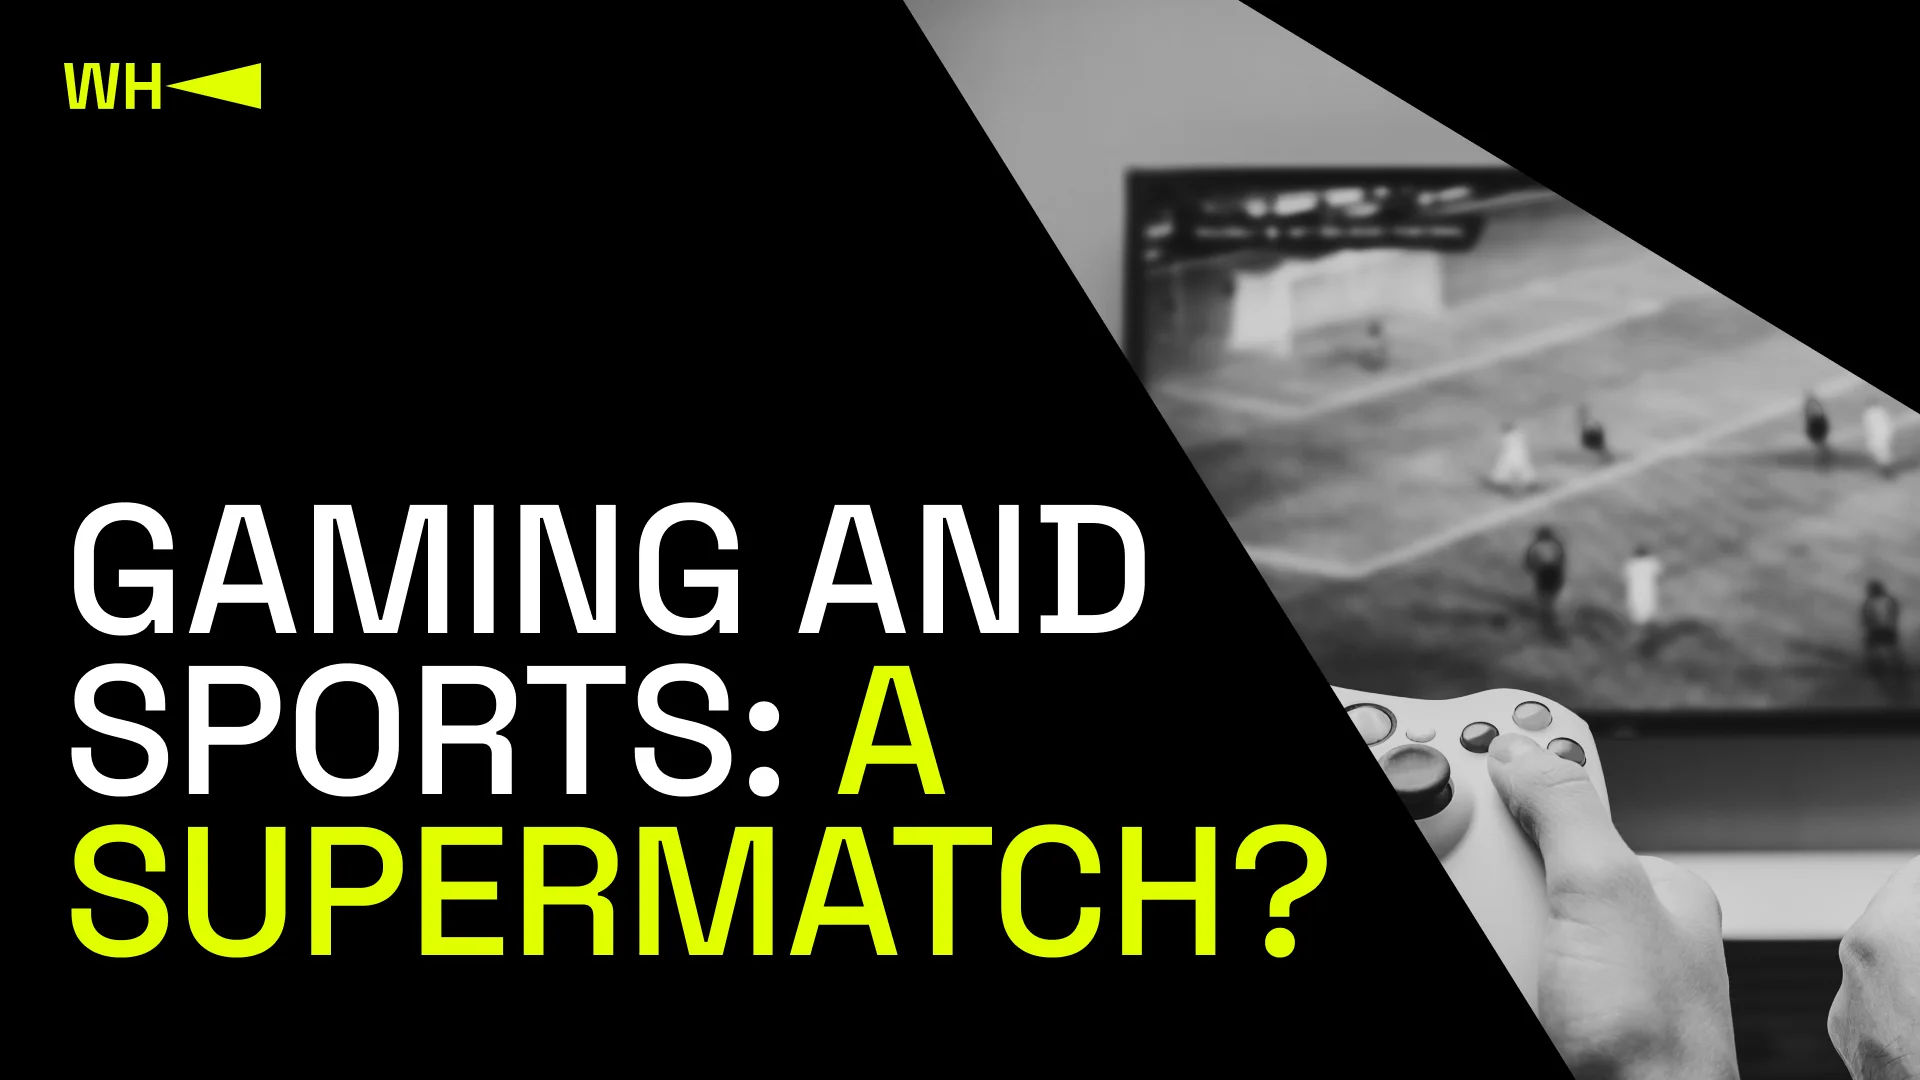 Gaming and sports a supermatch?